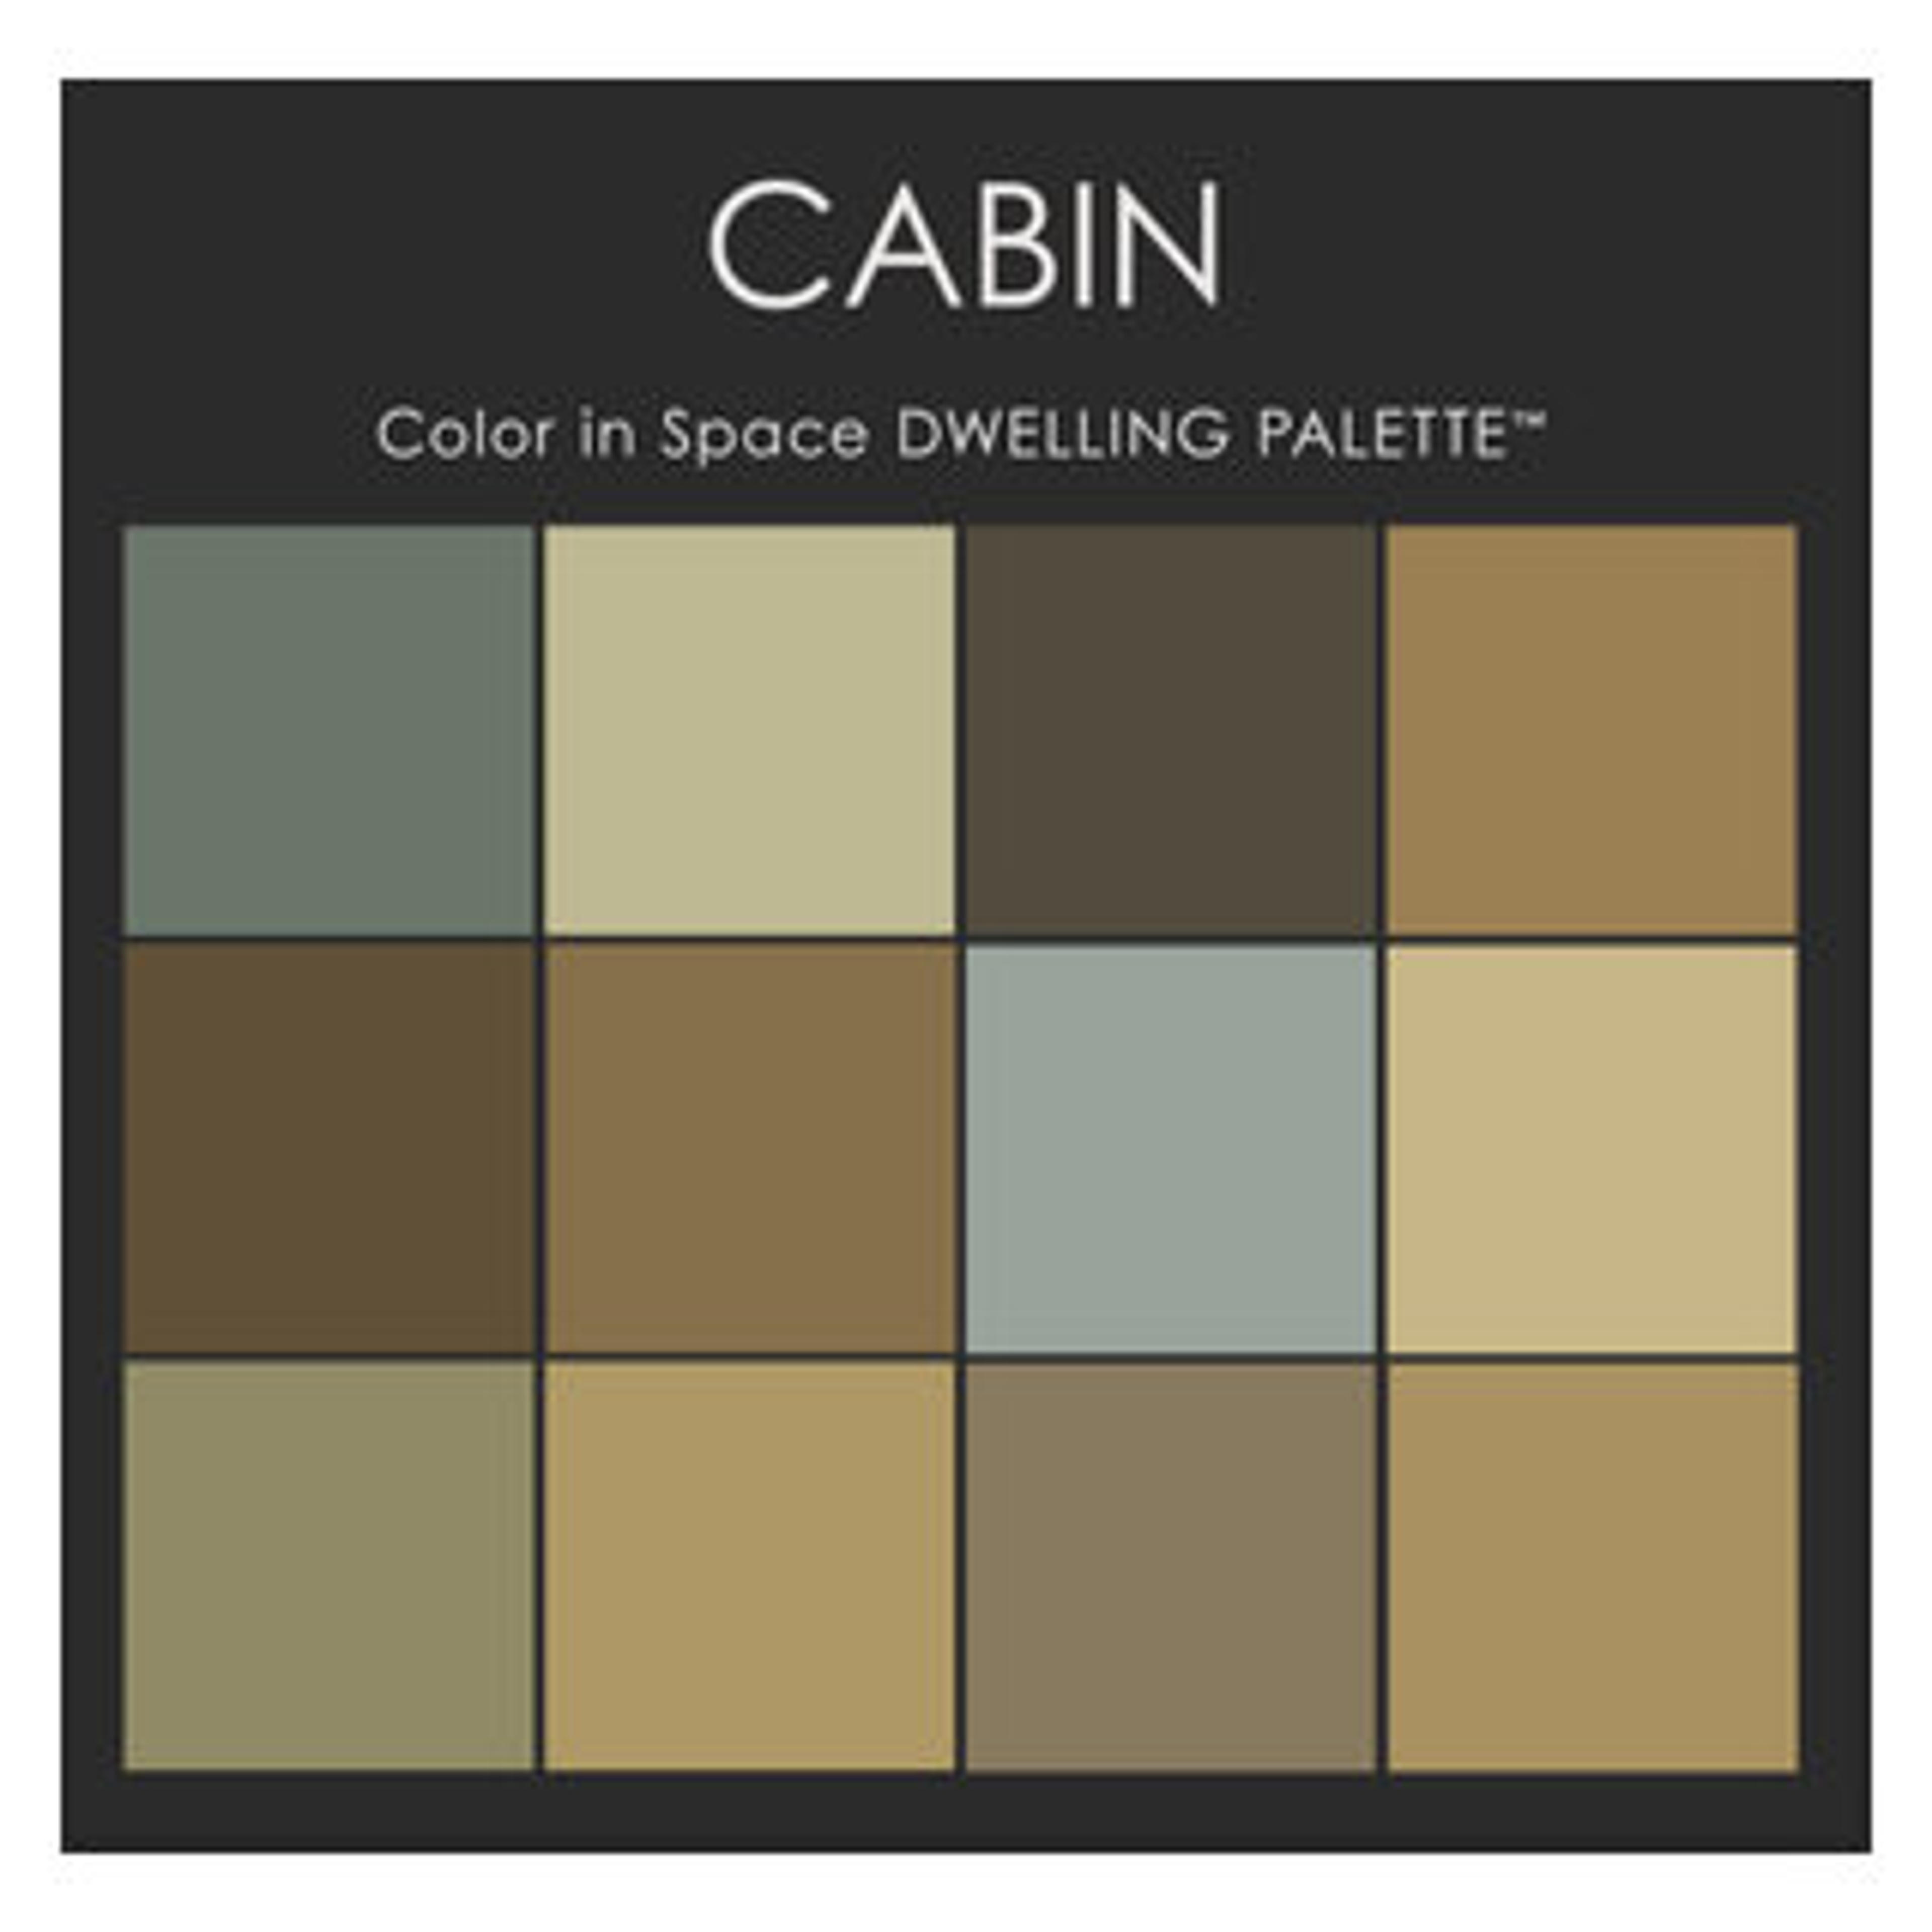 Color in Space Cabin Palette™ Swatches - Rustic - Paint - by Color in Space Inc. | Houzz